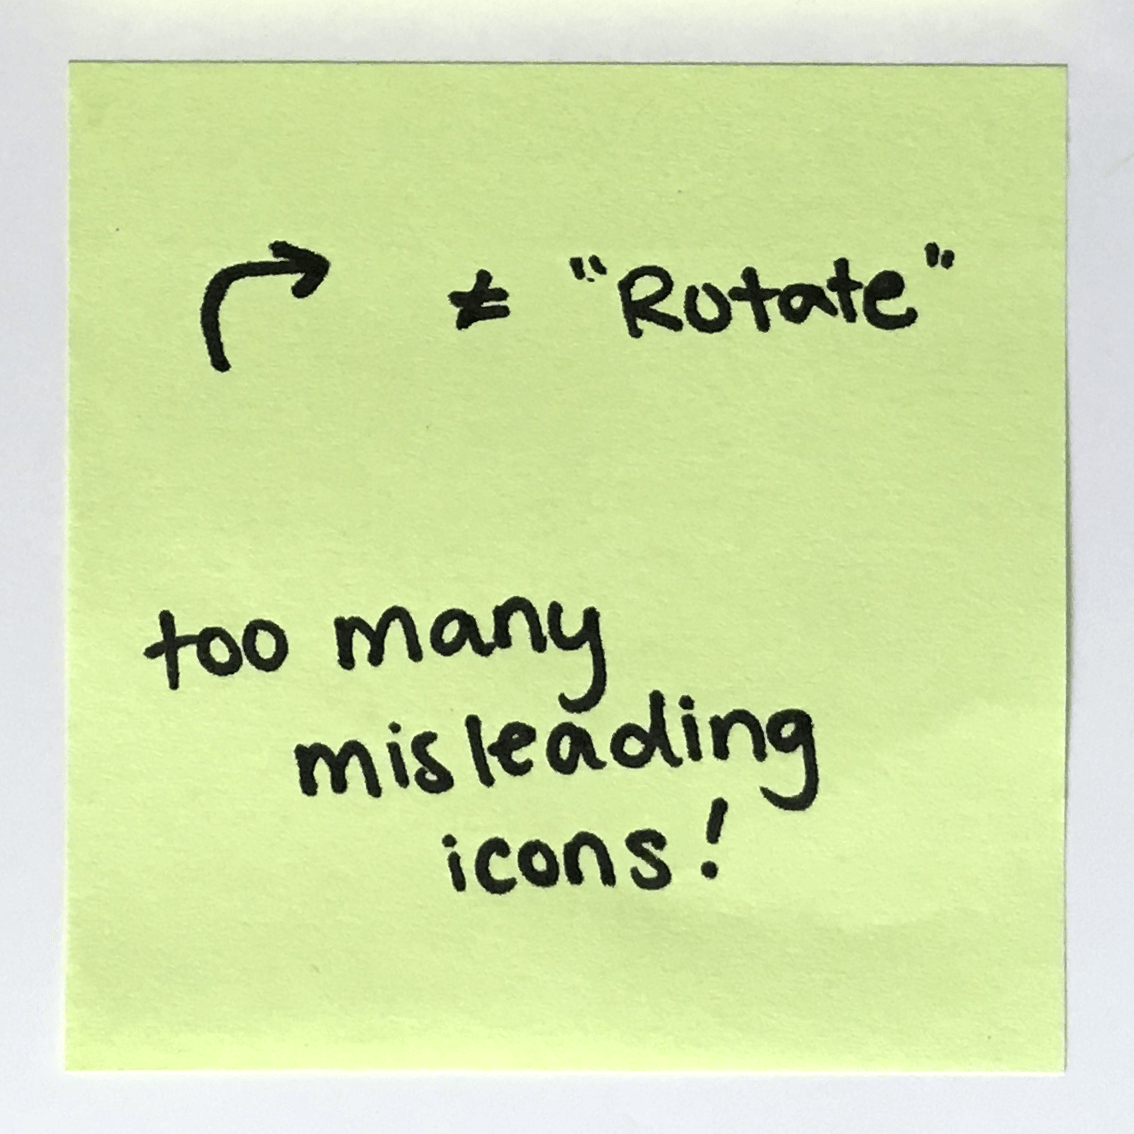 Post It with writing: '[arrow symbol] does not equal 'rotate' too many misleading icons!'